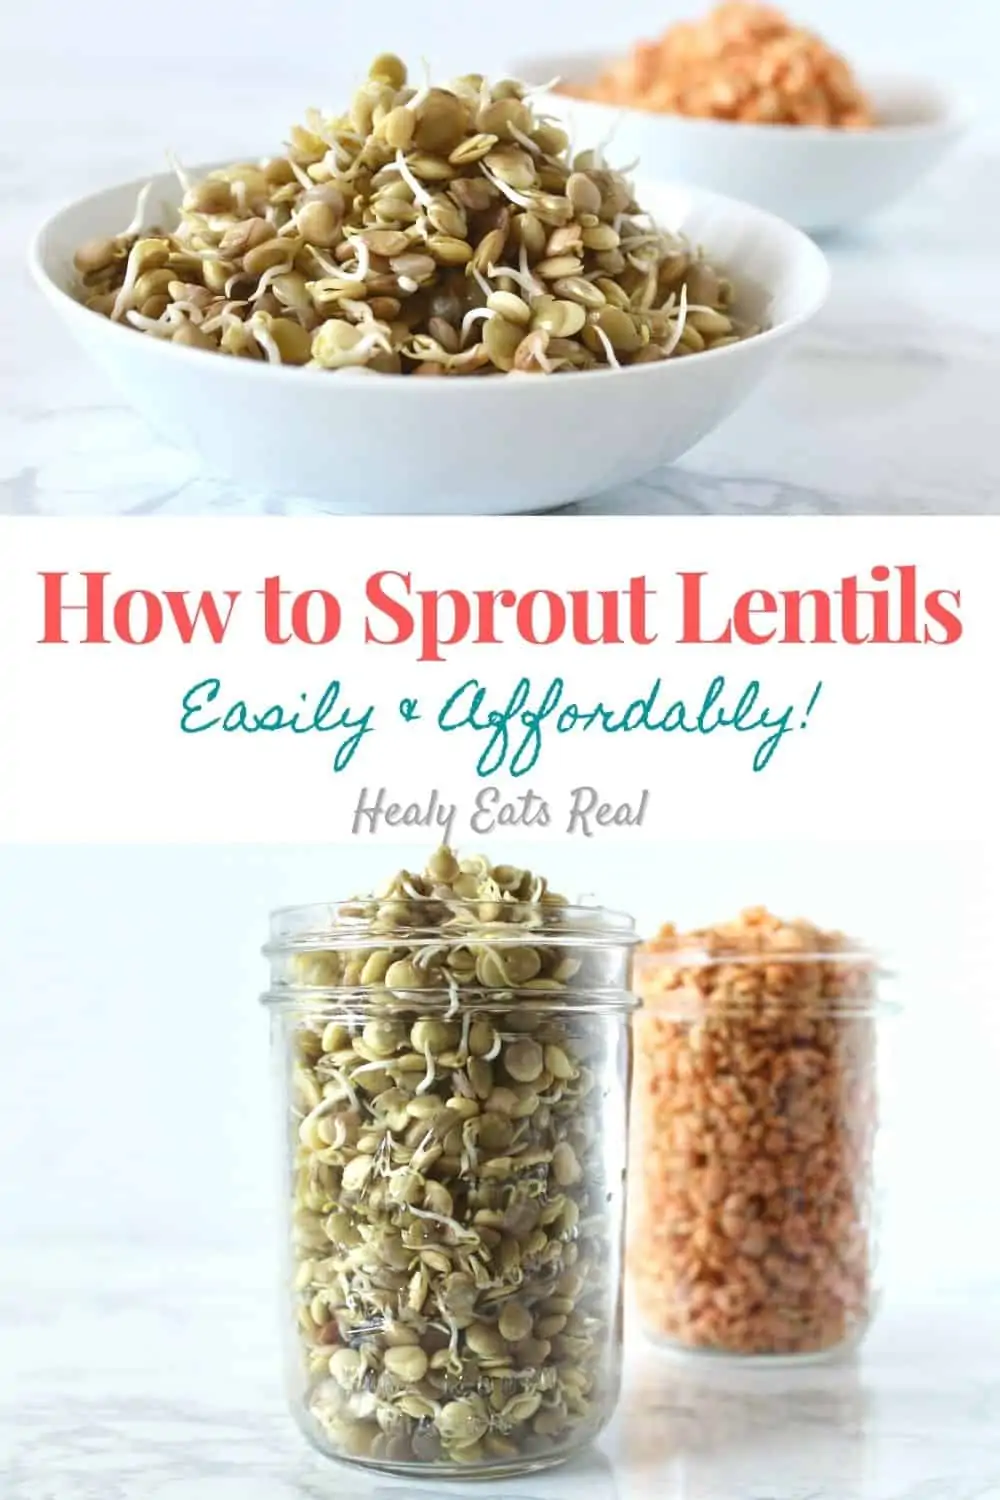 How to Sprout Lentils The Easy Way (VIDEO)